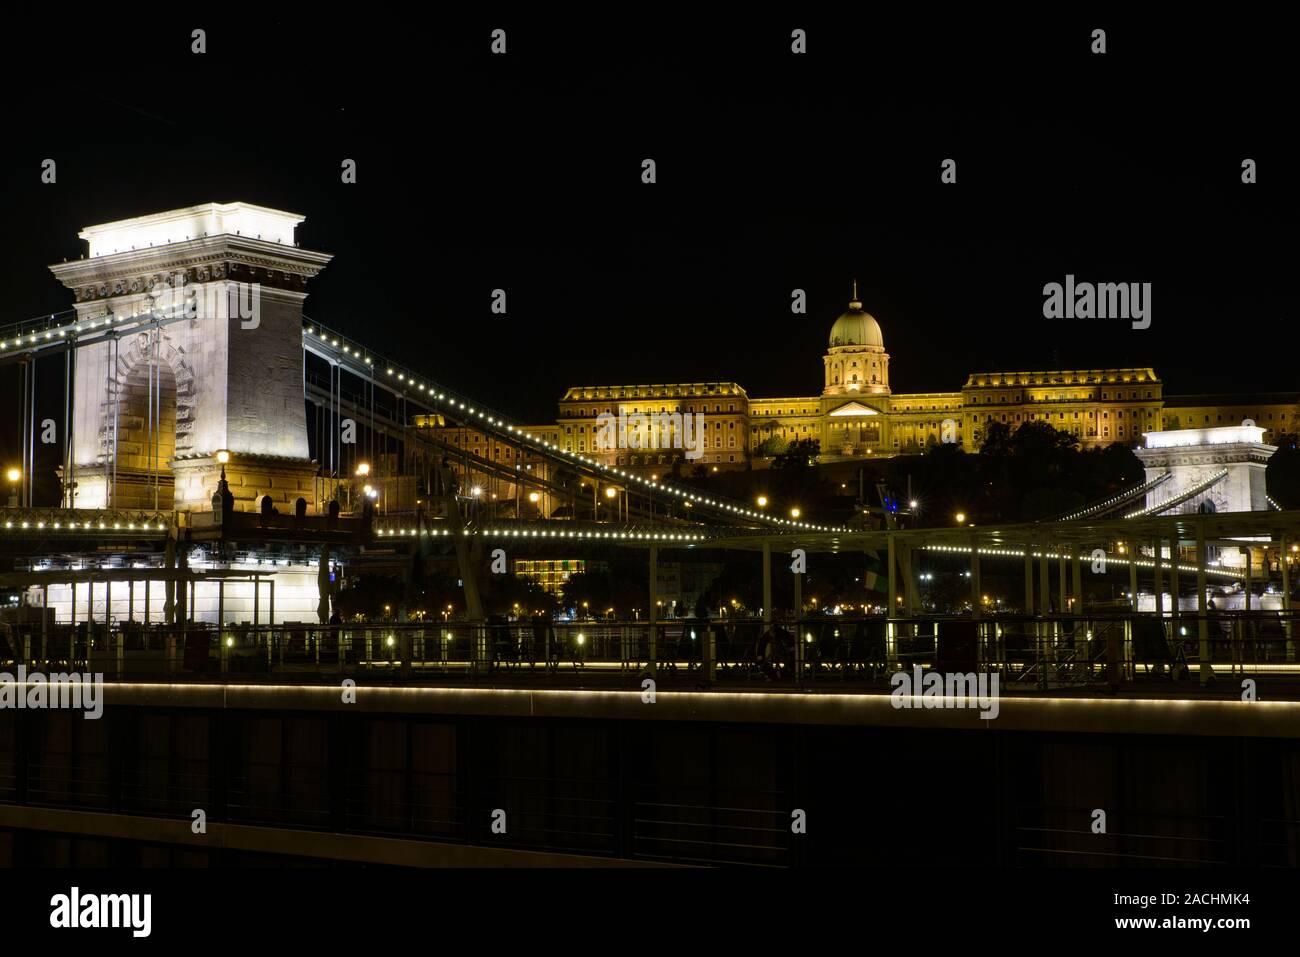 Night view of Széchenyi Chain Bridge across the River Danube connecting Buda and Pest, Budapest, Hungary Stock Photo